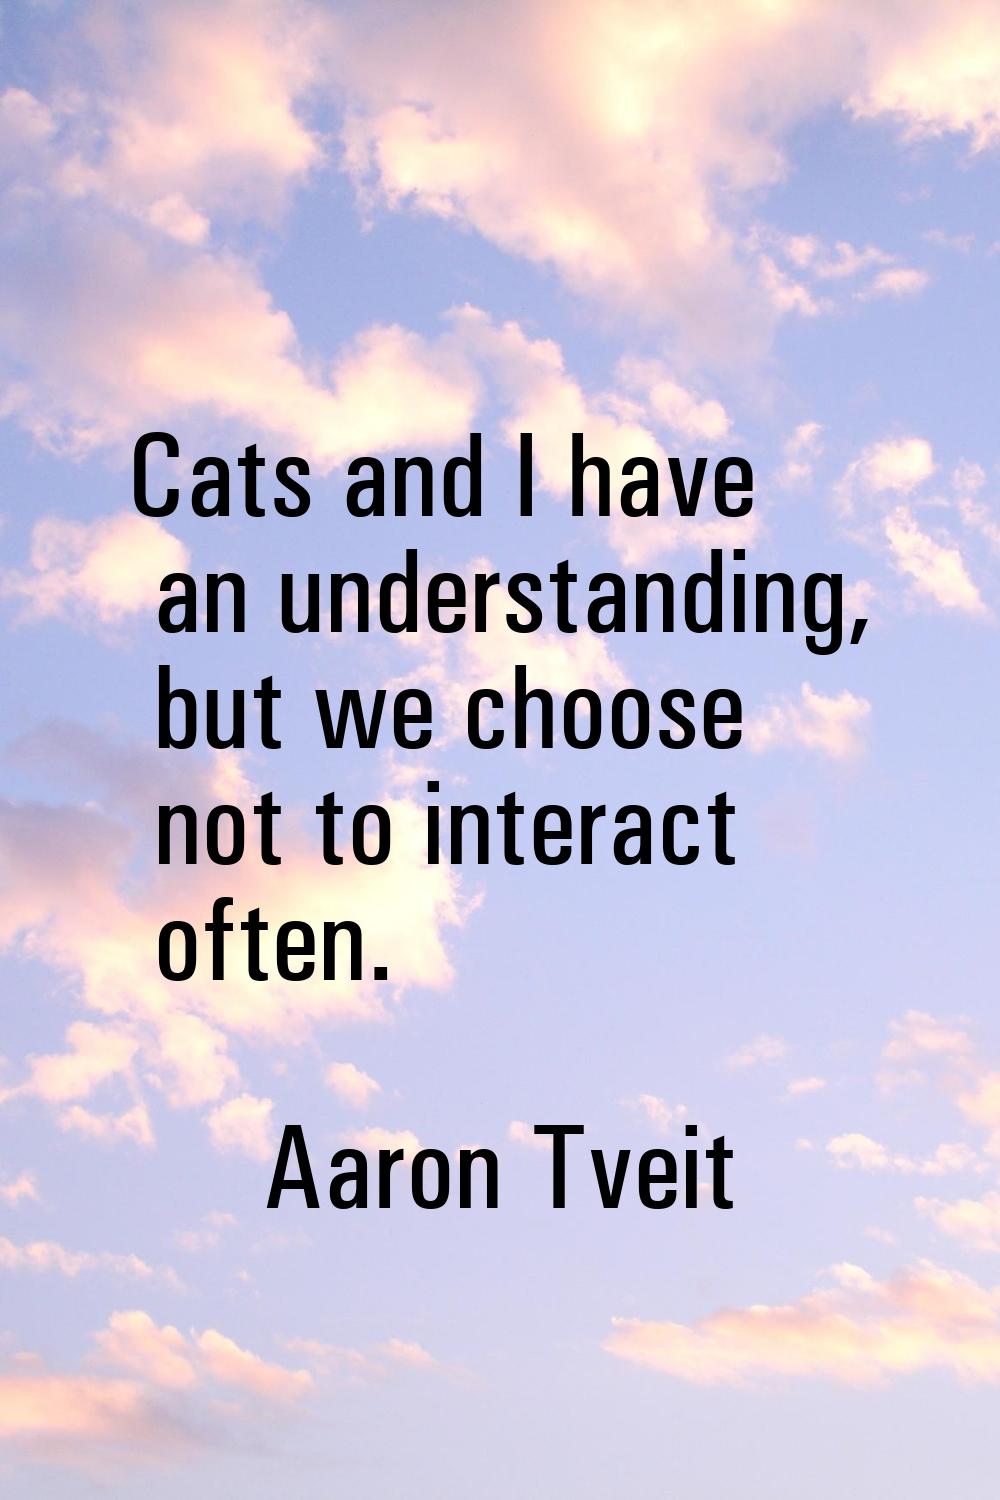 Cats and I have an understanding, but we choose not to interact often.